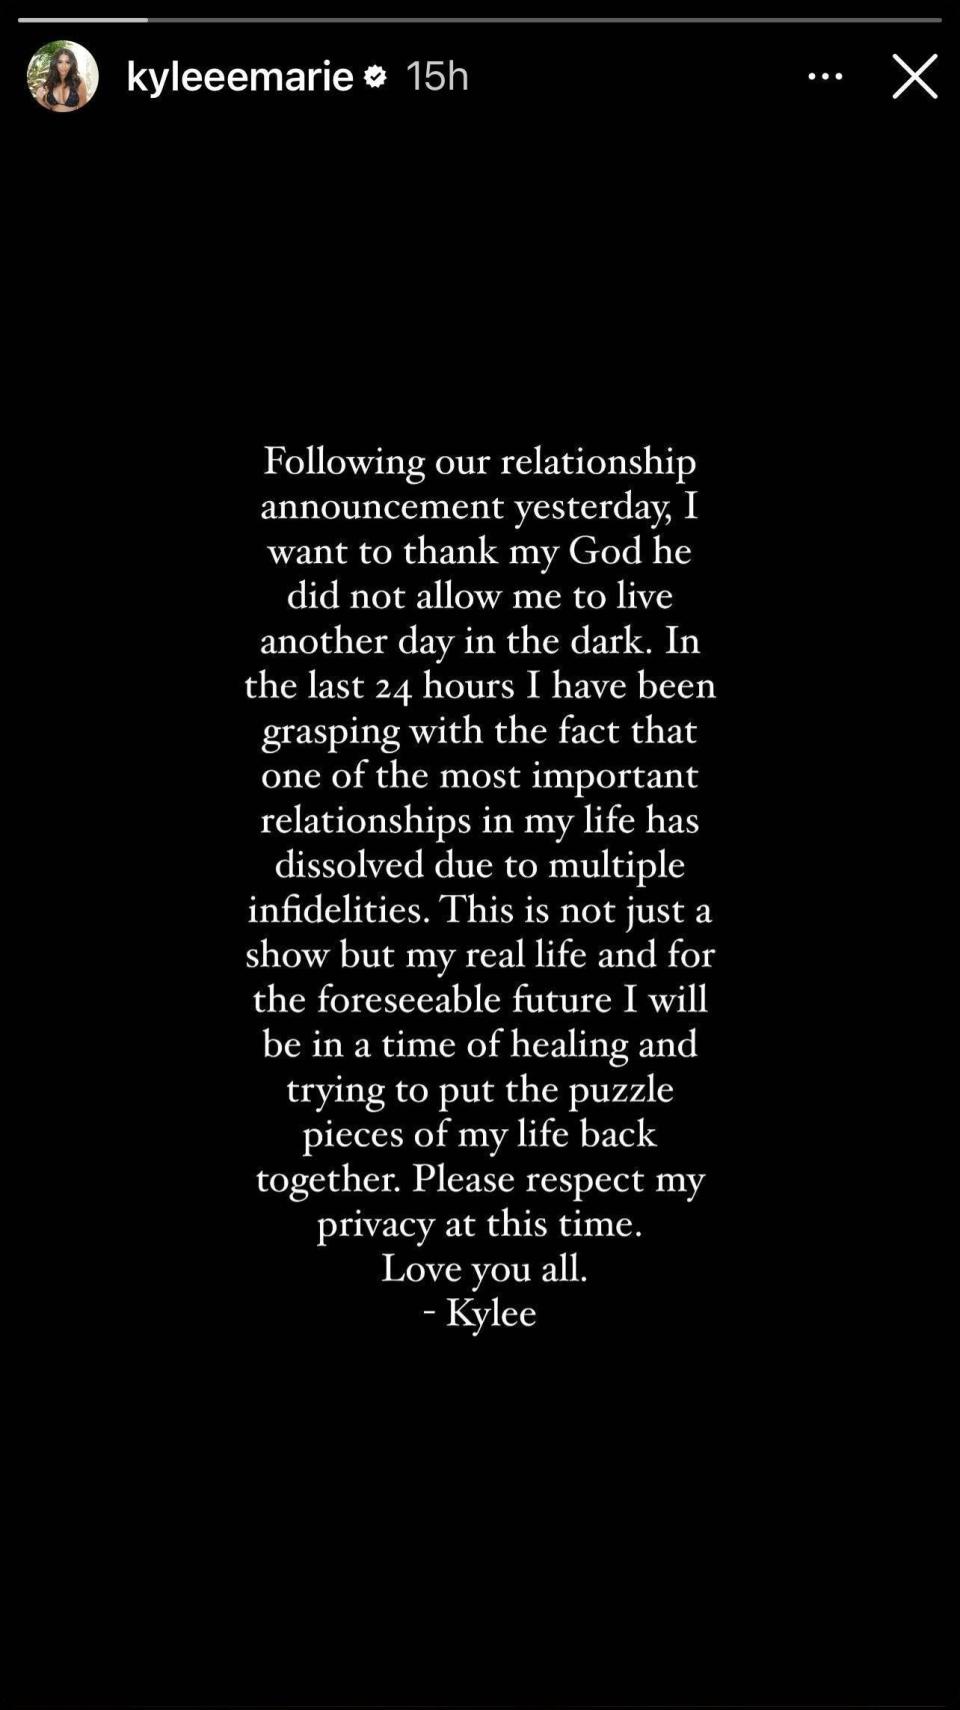 A screenshot of a breakup announcement posted to Instagram.